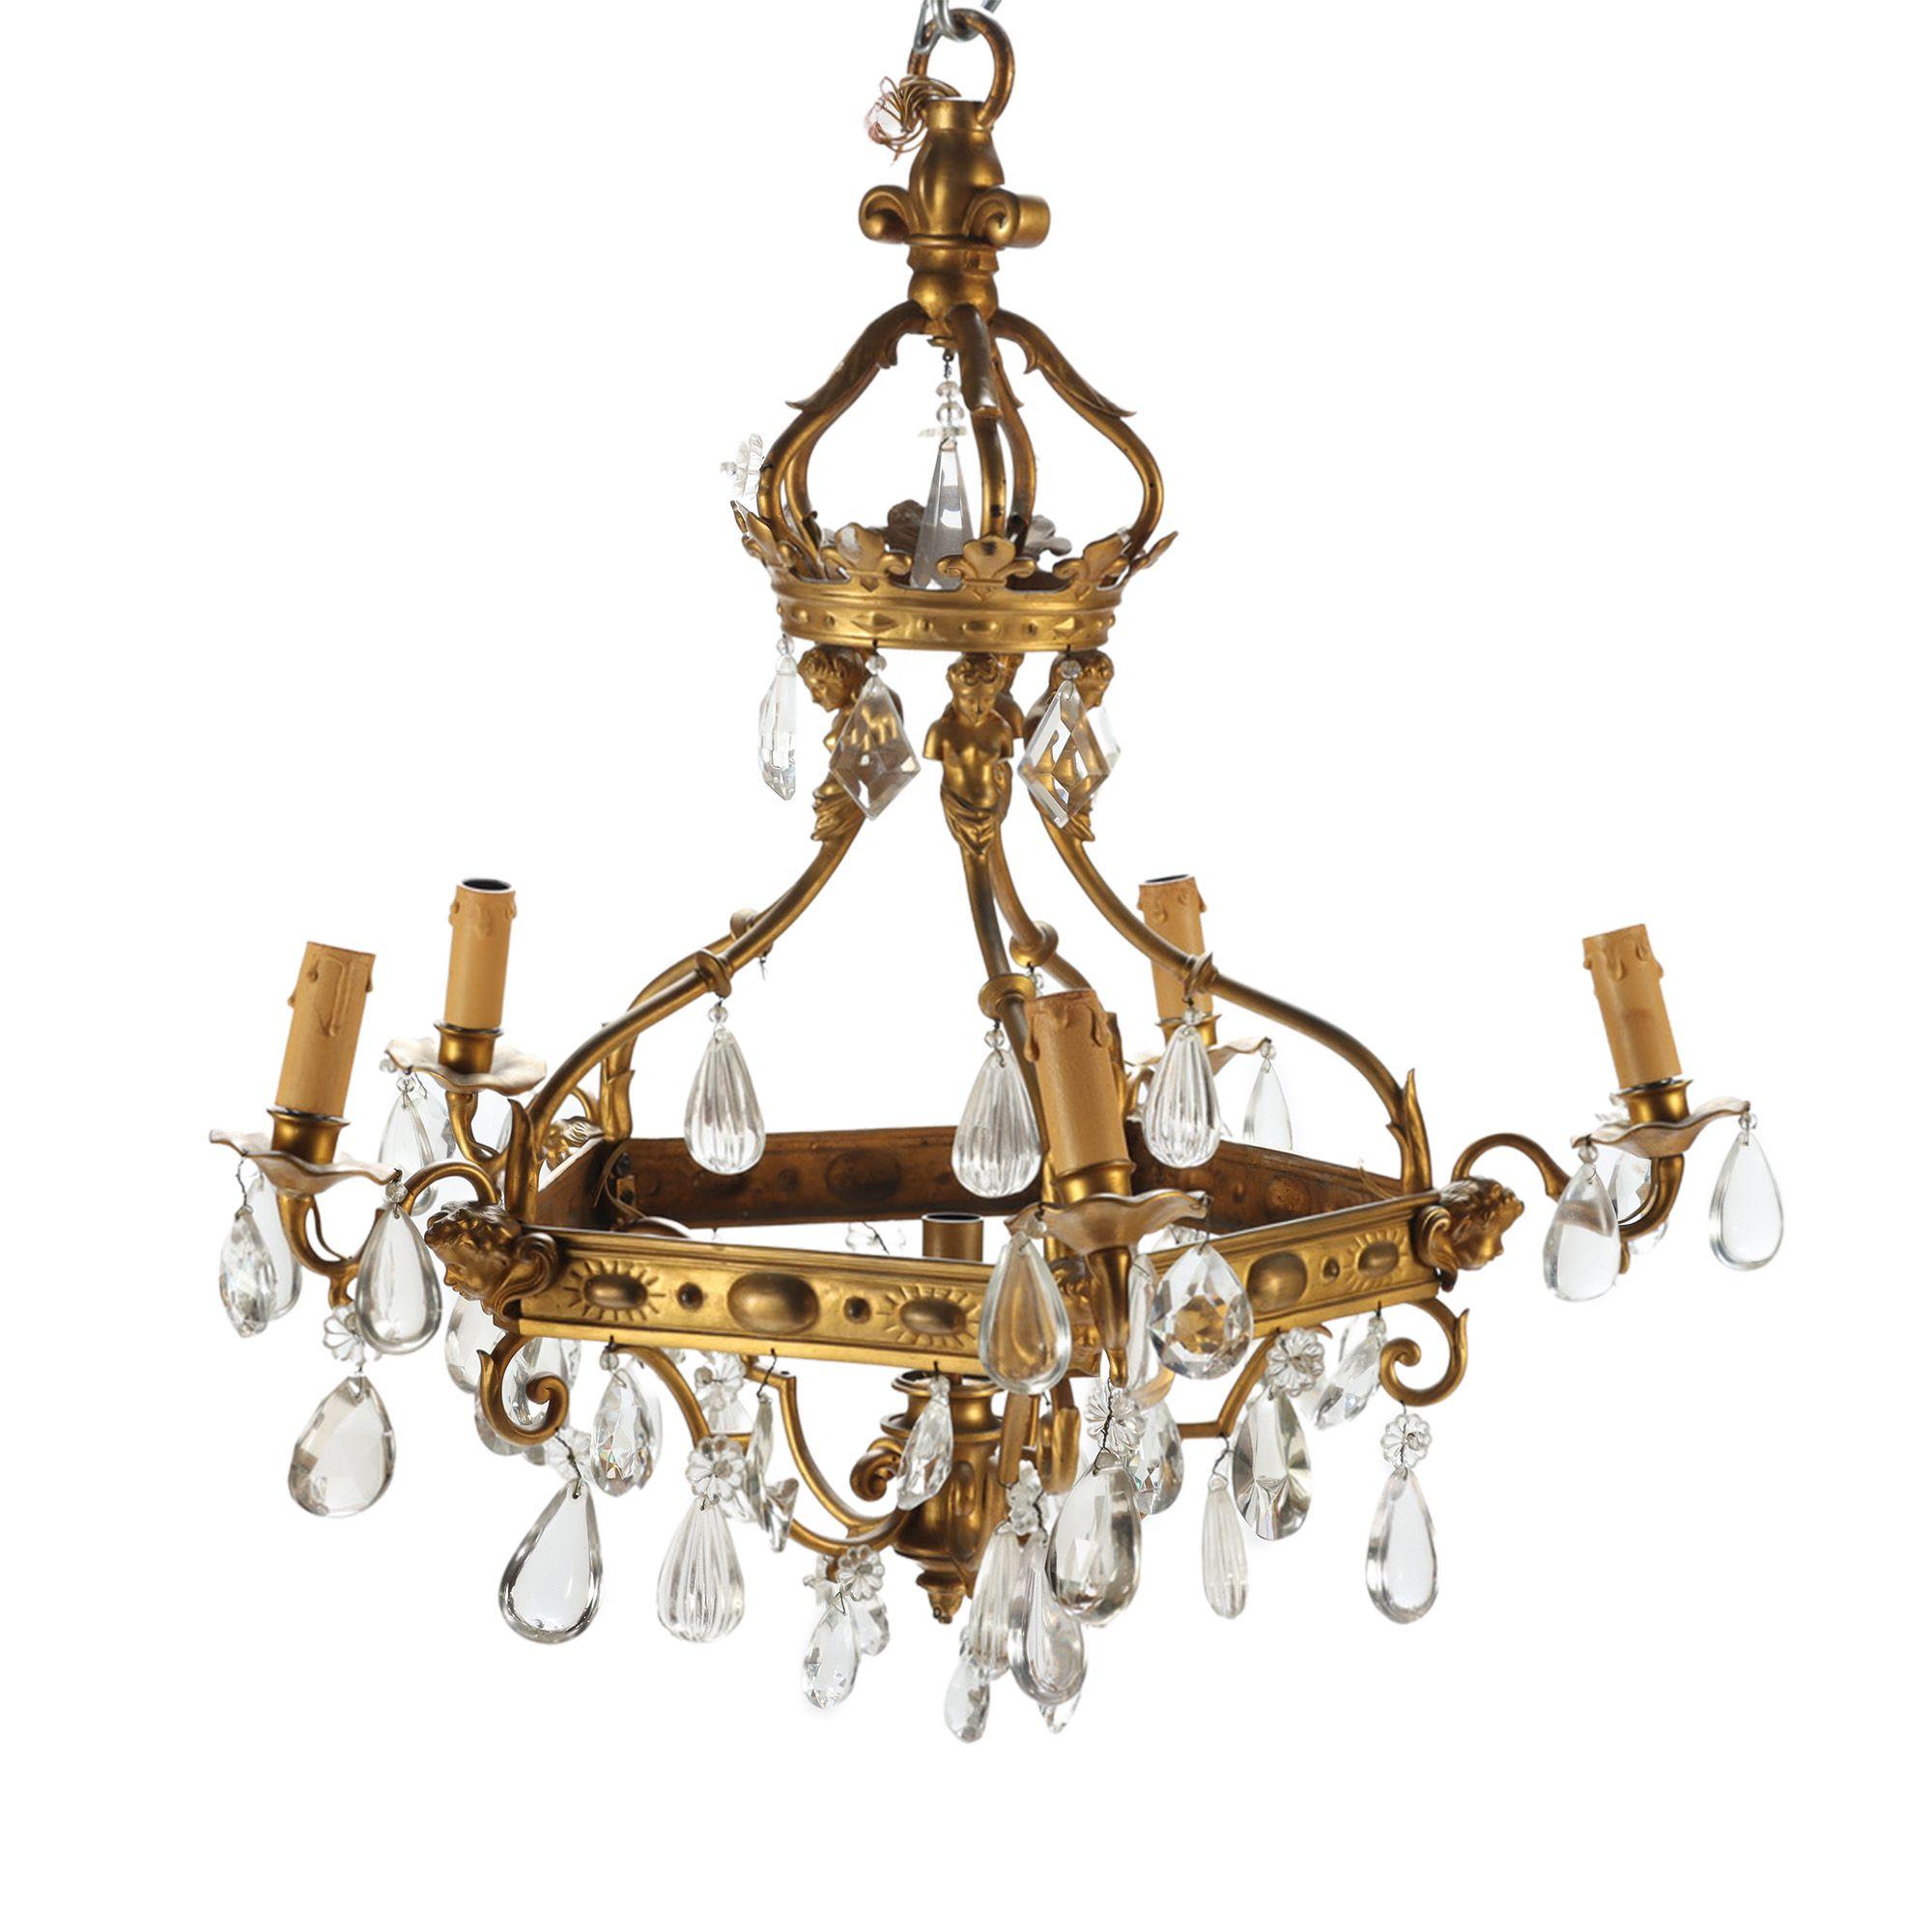 A French antique 5 light bronze and crystal chandelier decorated with cherubs faces.